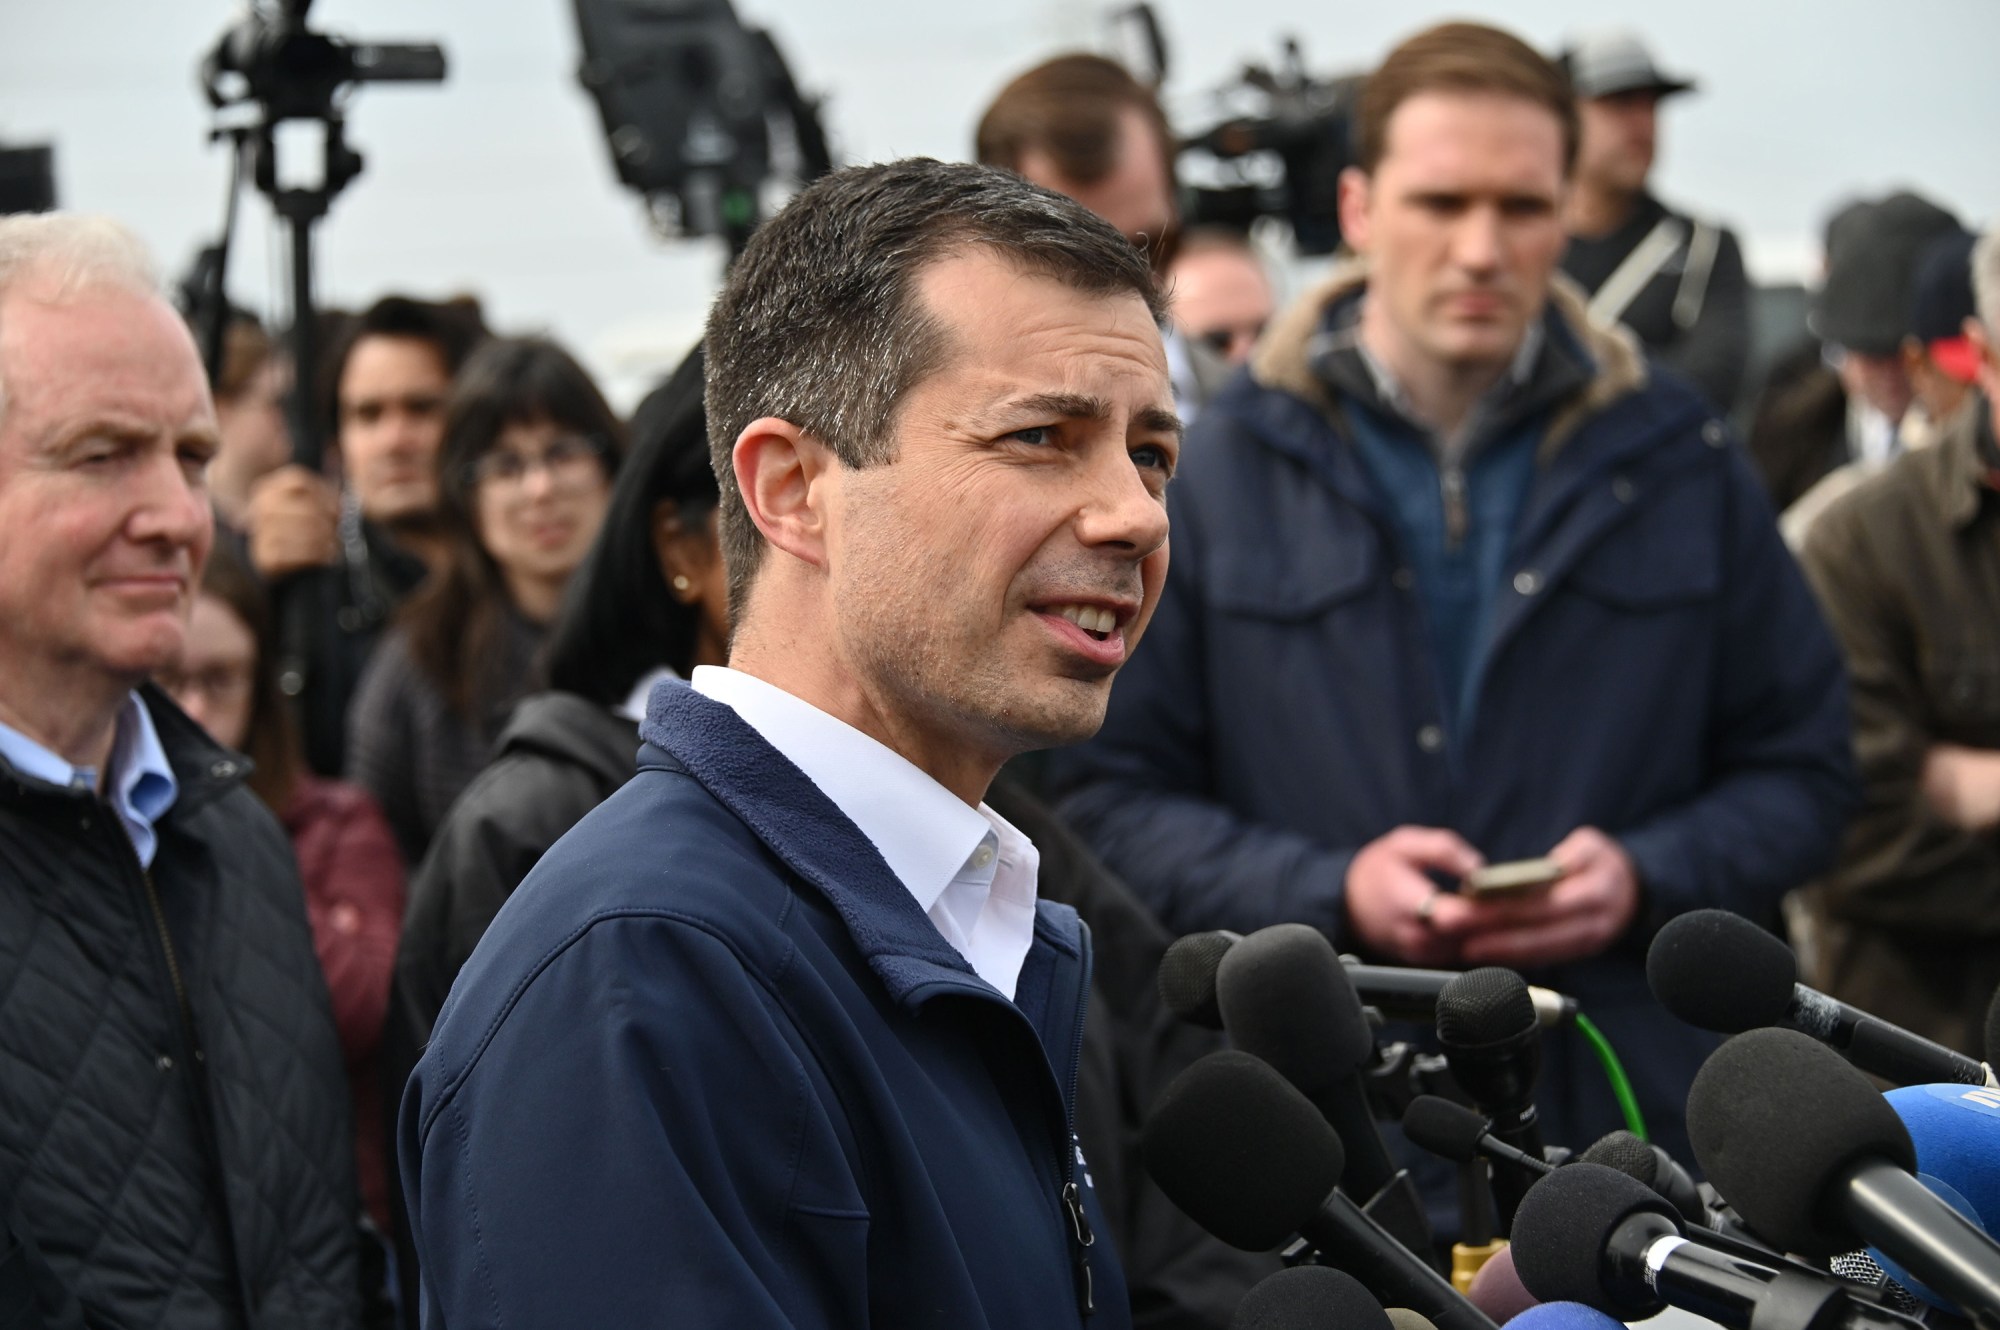 U.S. Transportation Secretary Pete Buttigieg speaks at a press conference after the collapse of the Francis Scott Key Bridge on Tuesday. (Kim Hairston/Staff)